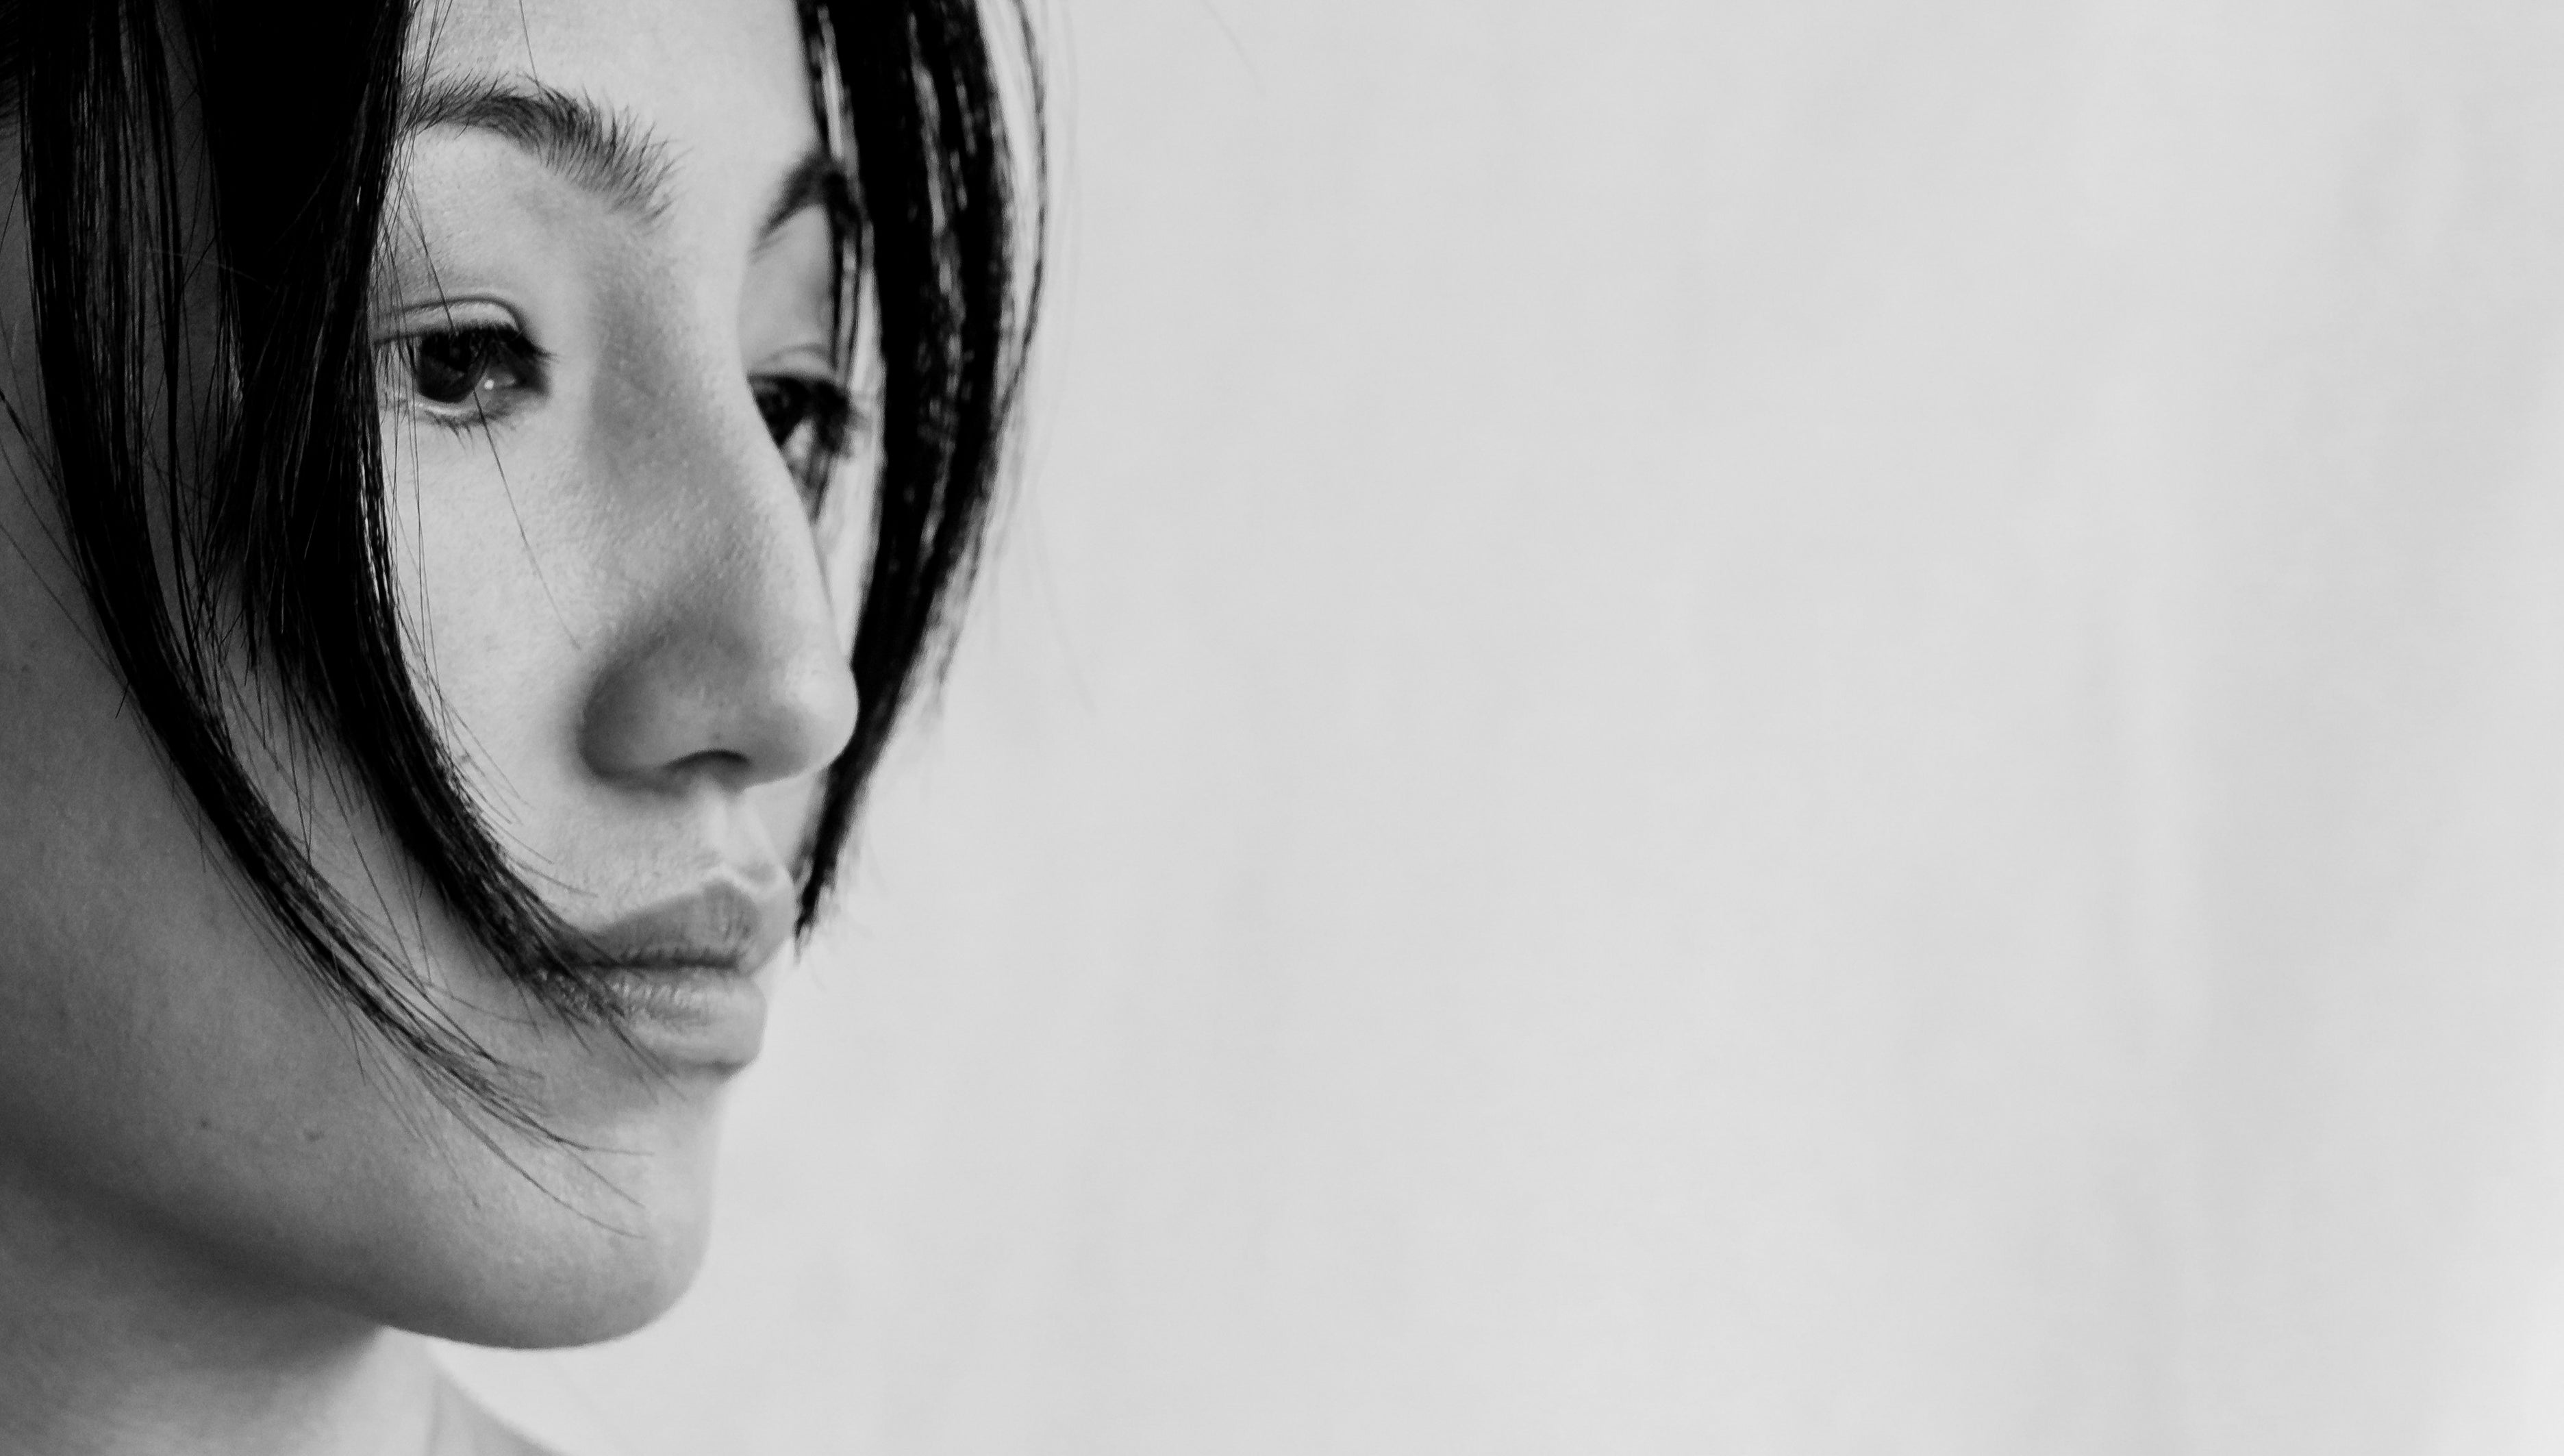 Close-up of a woman's contemplative face in monochrome, strands of hair framing her cheek.